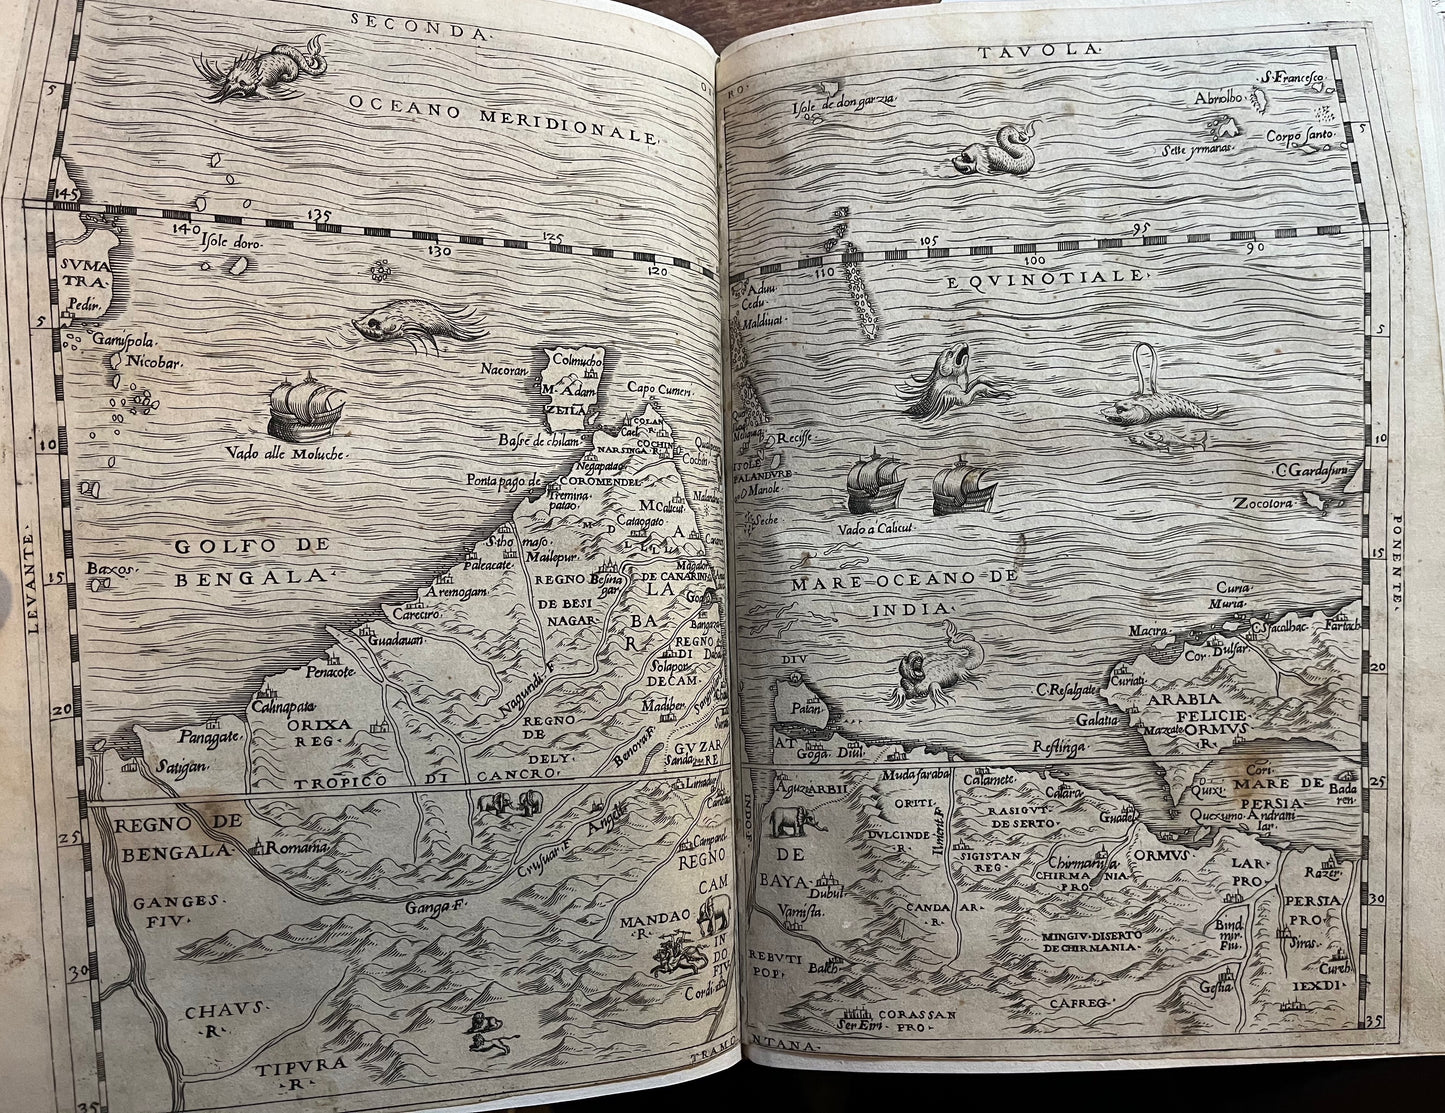 Ramusio - Delle Navigationi et Viaggi - Complete three volumes with 10 double page maps 1563, 1574, 1556. Rare FIRST EDITION of the Third Volume on the Americas